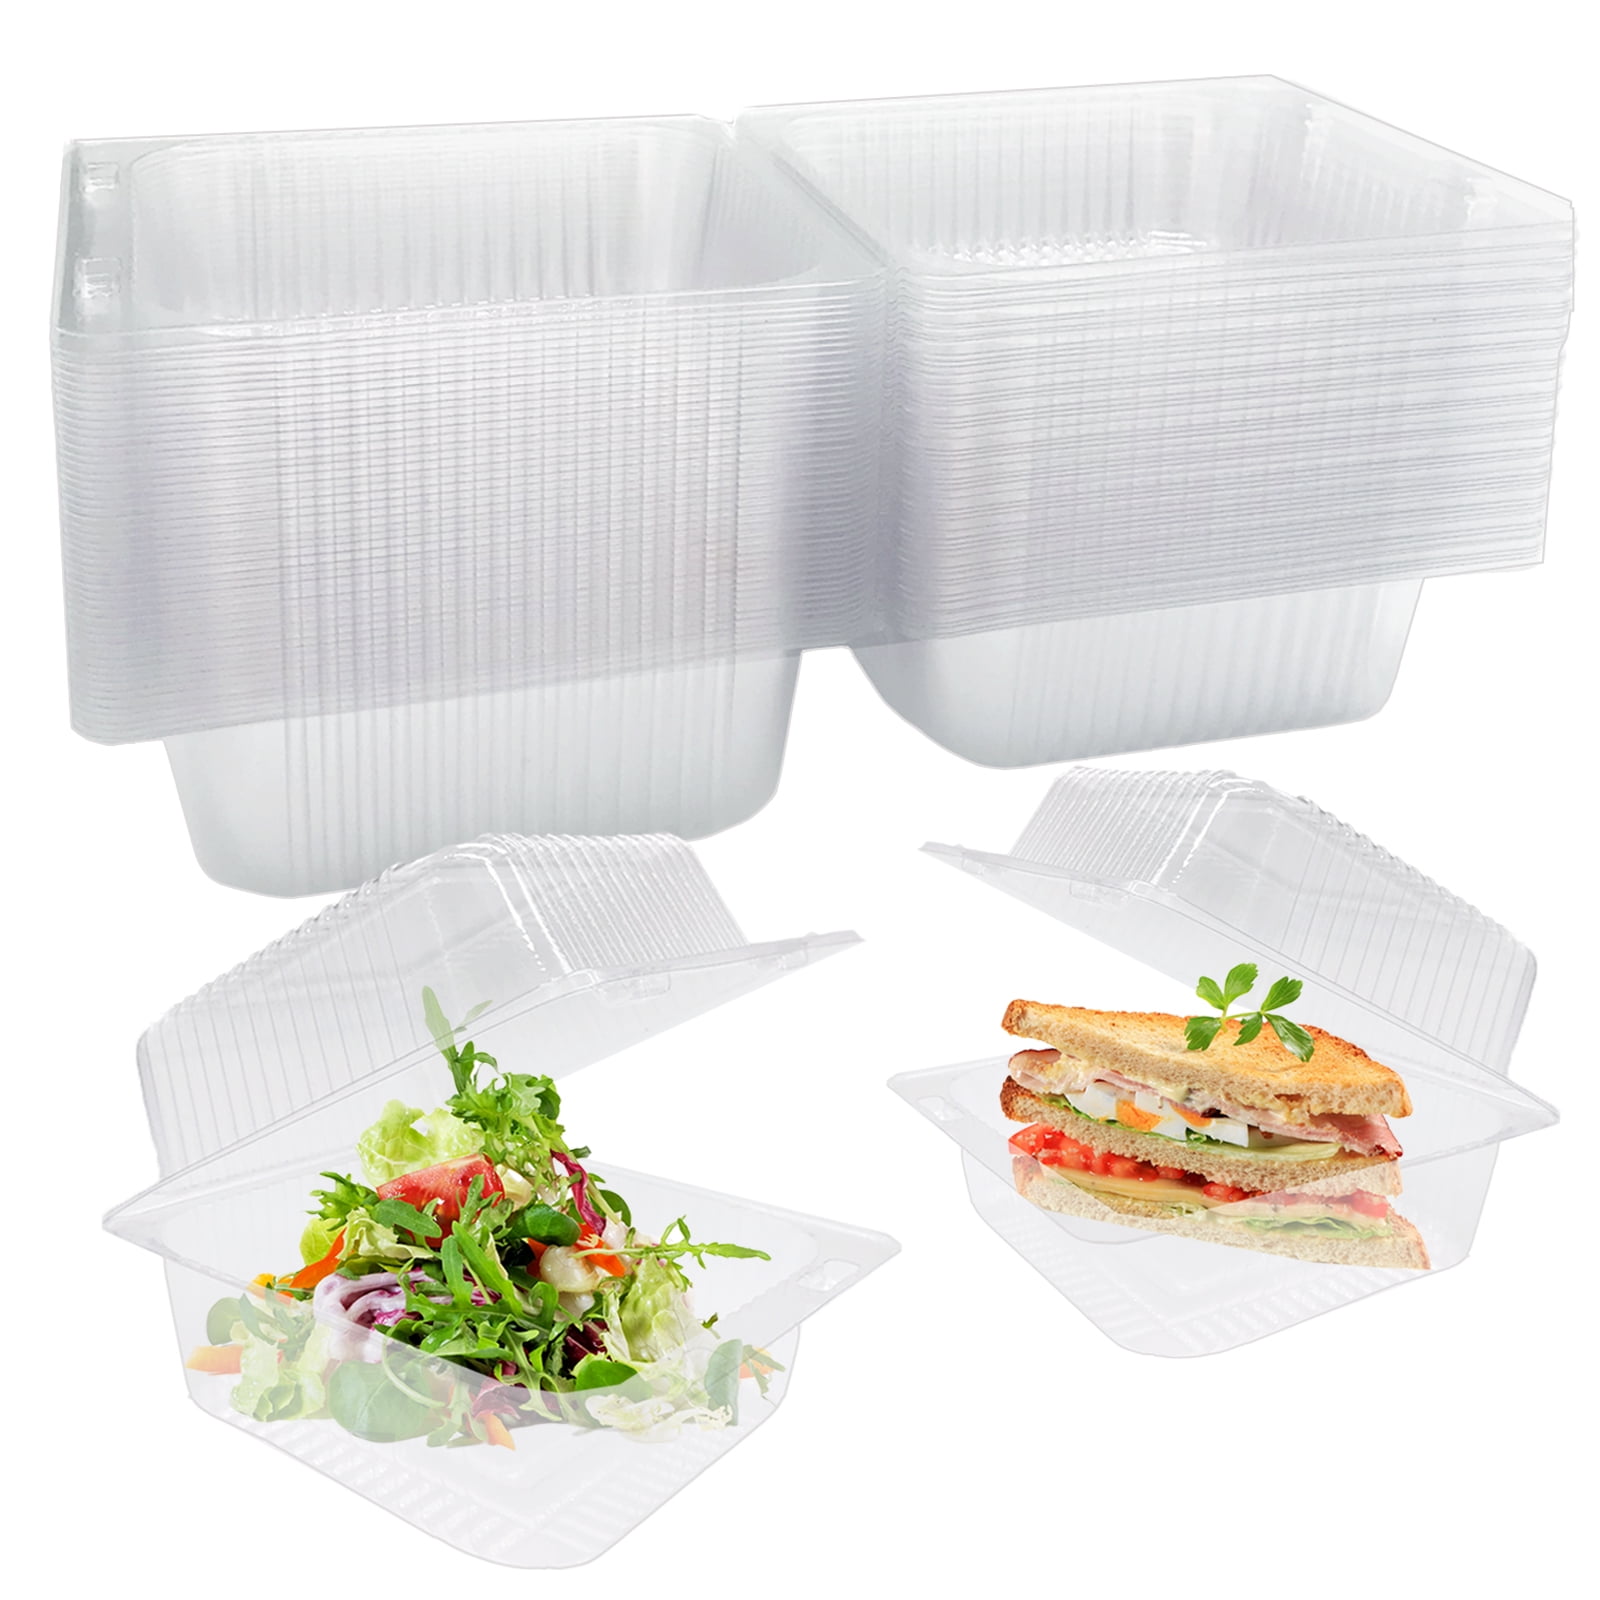 Clear Plastic Medium Square Hinged Food Container, 5 Length x 5 Width x 2.75 Depth by MT Products - (40 Pieces)